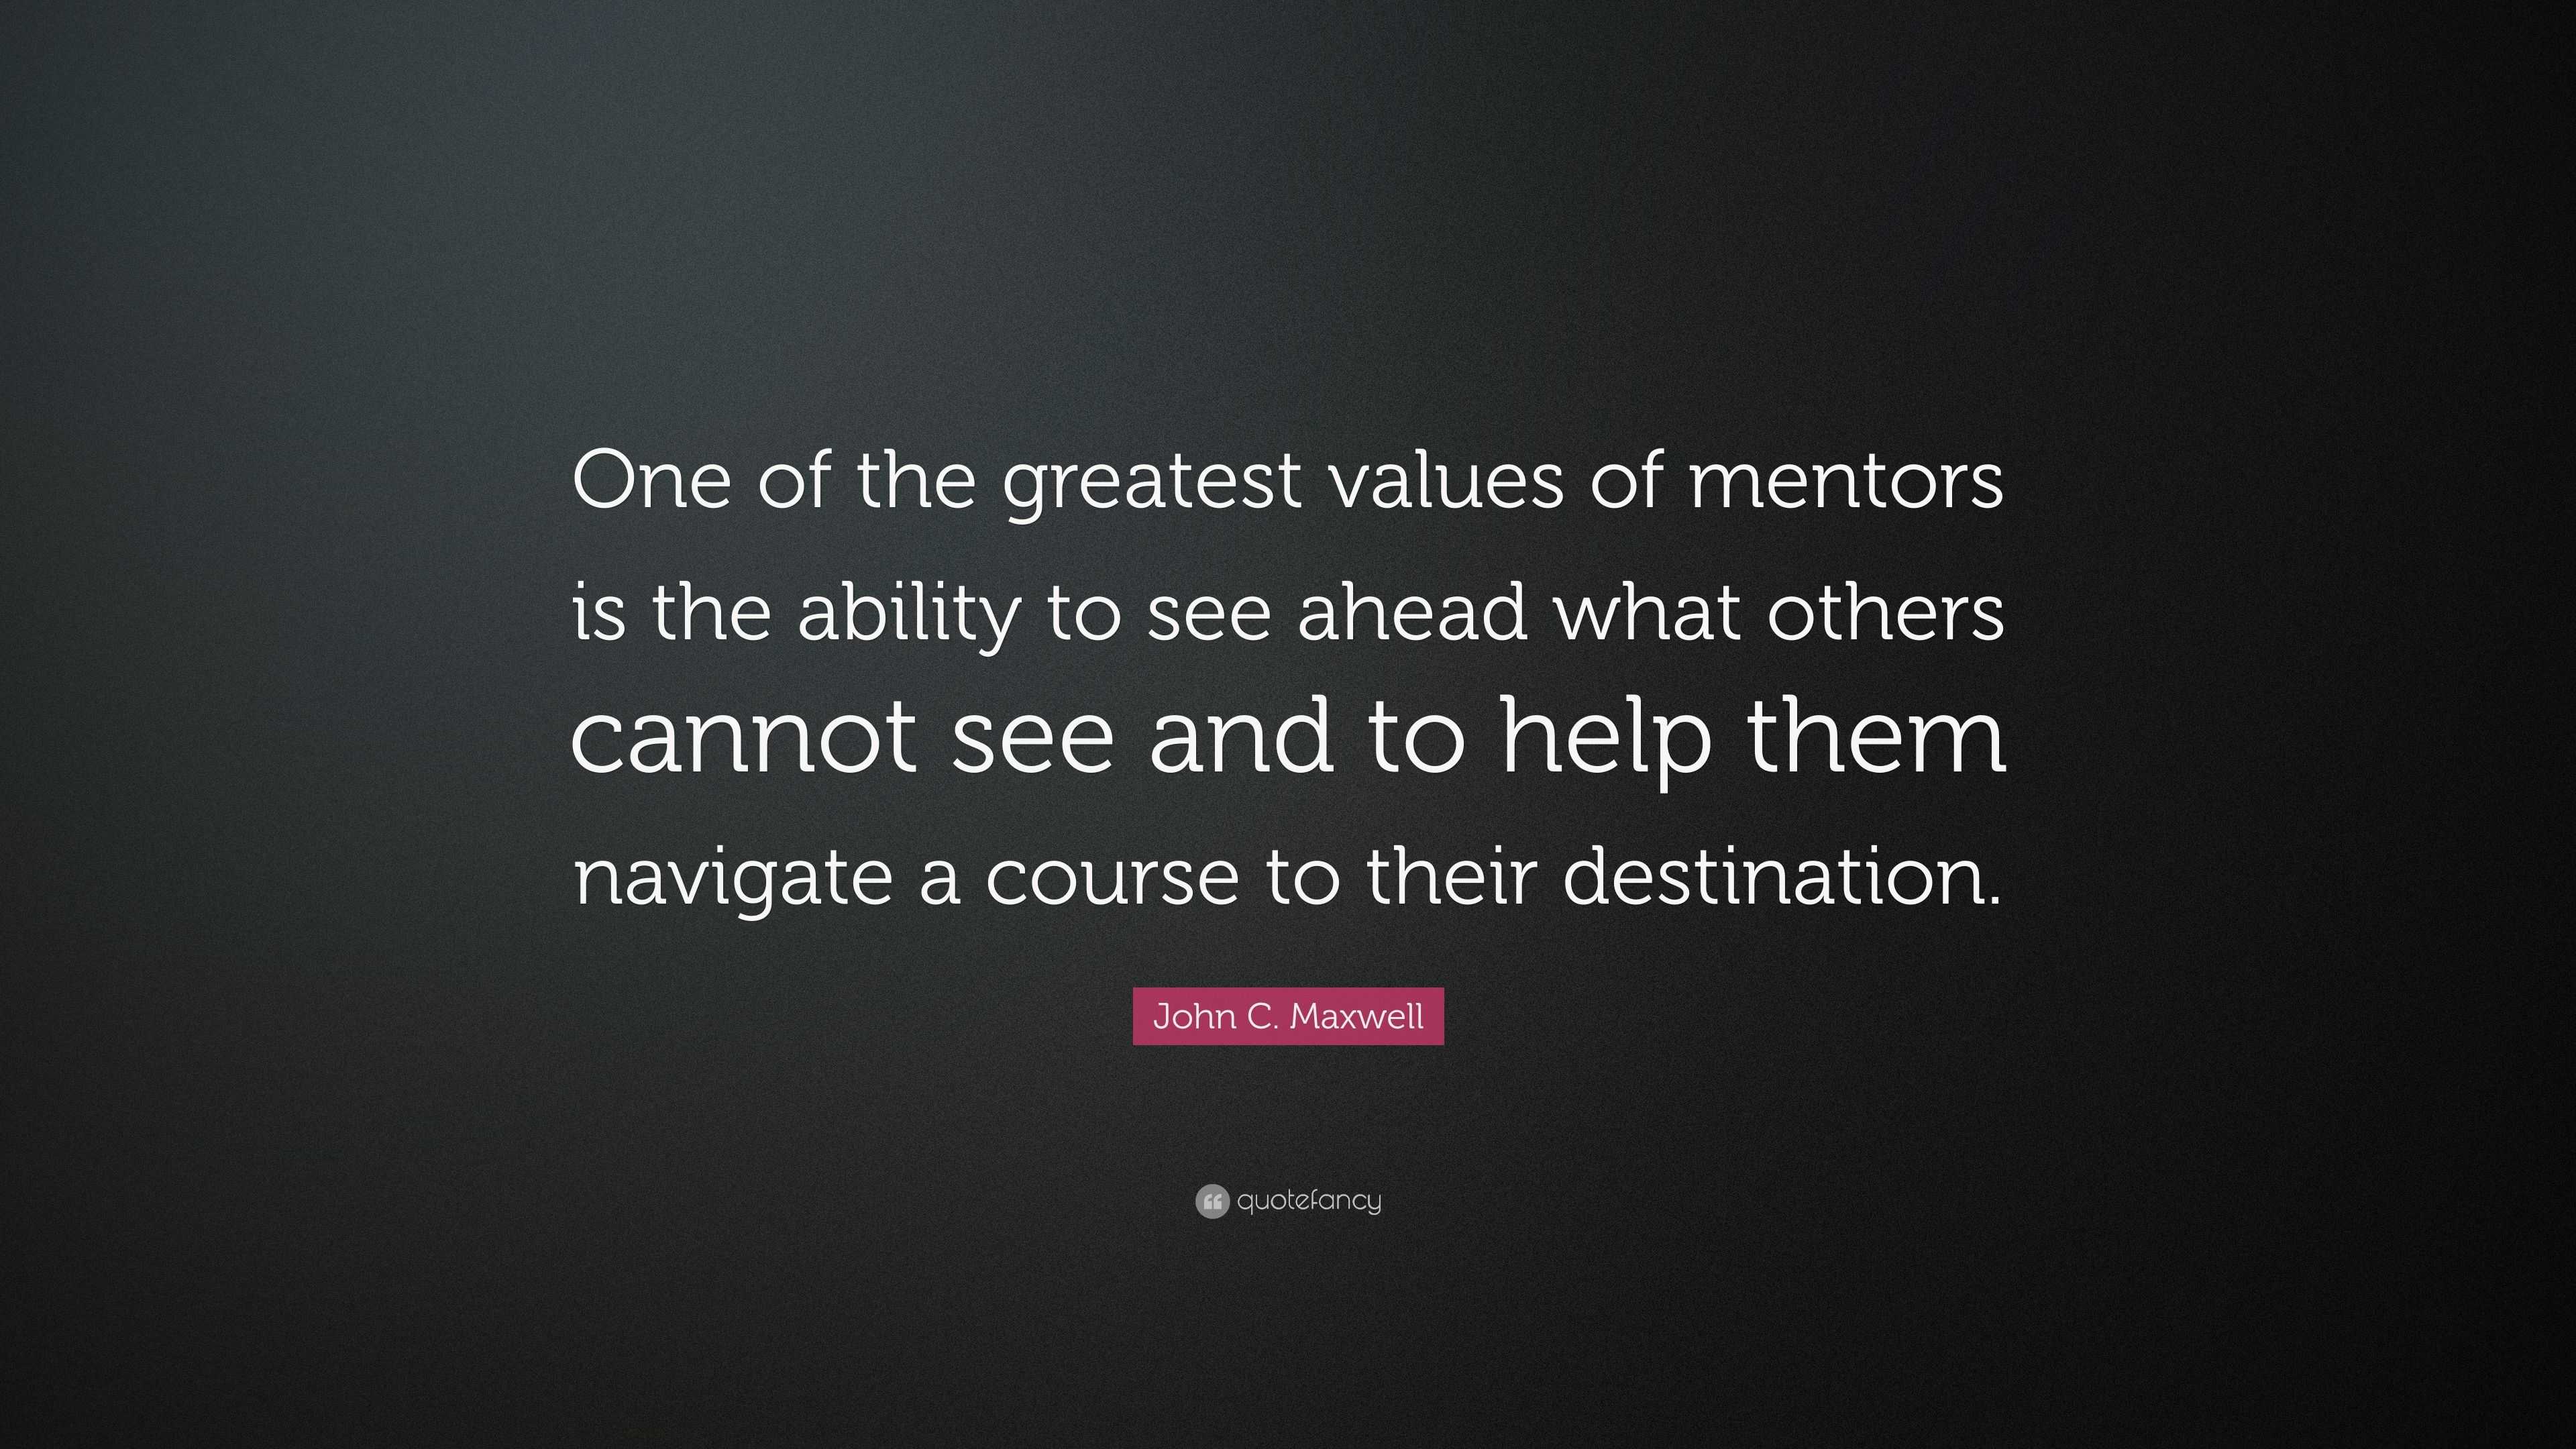 John C. Maxwell Quote “One of the greatest values of